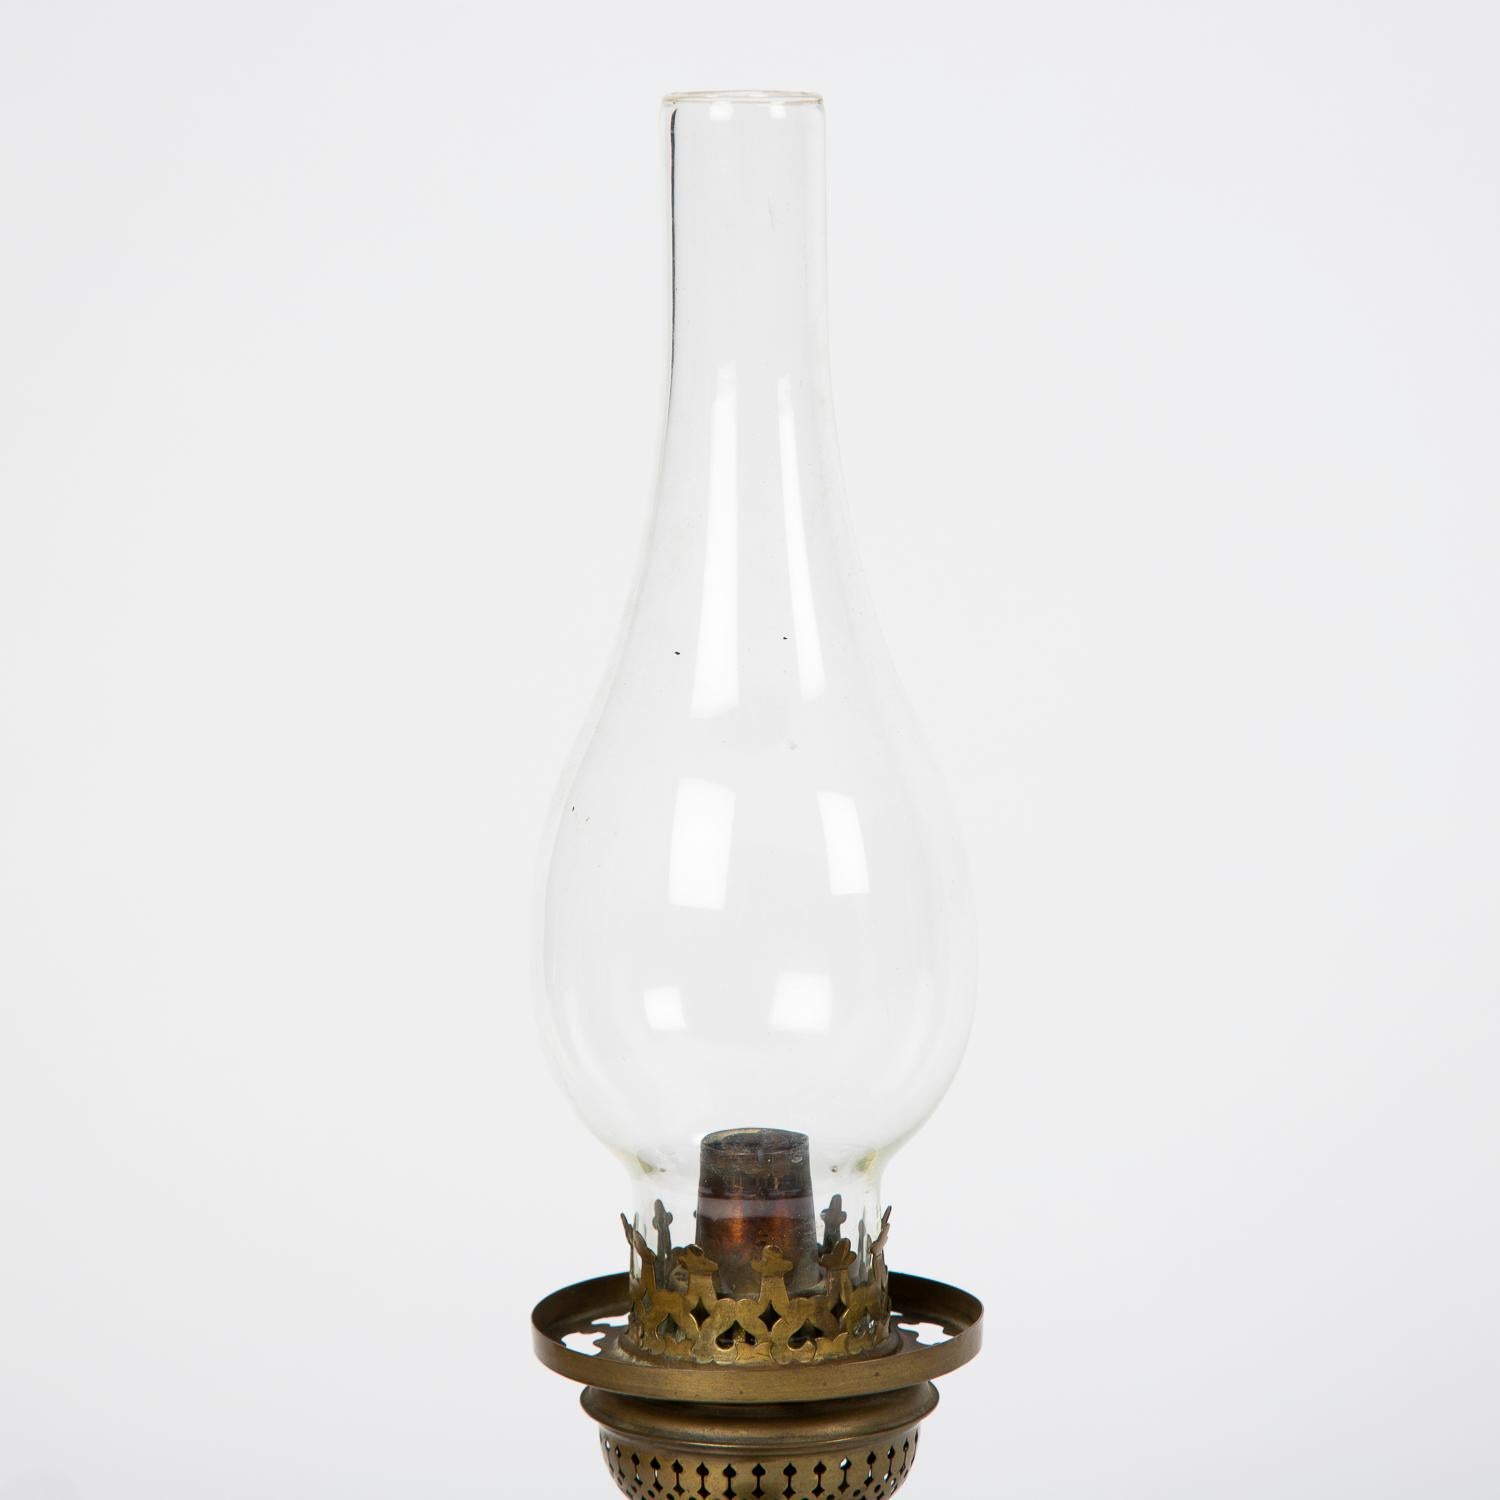 Oil Lamp with an Illuminating Globe Shade, circa 1885 For Sale 4